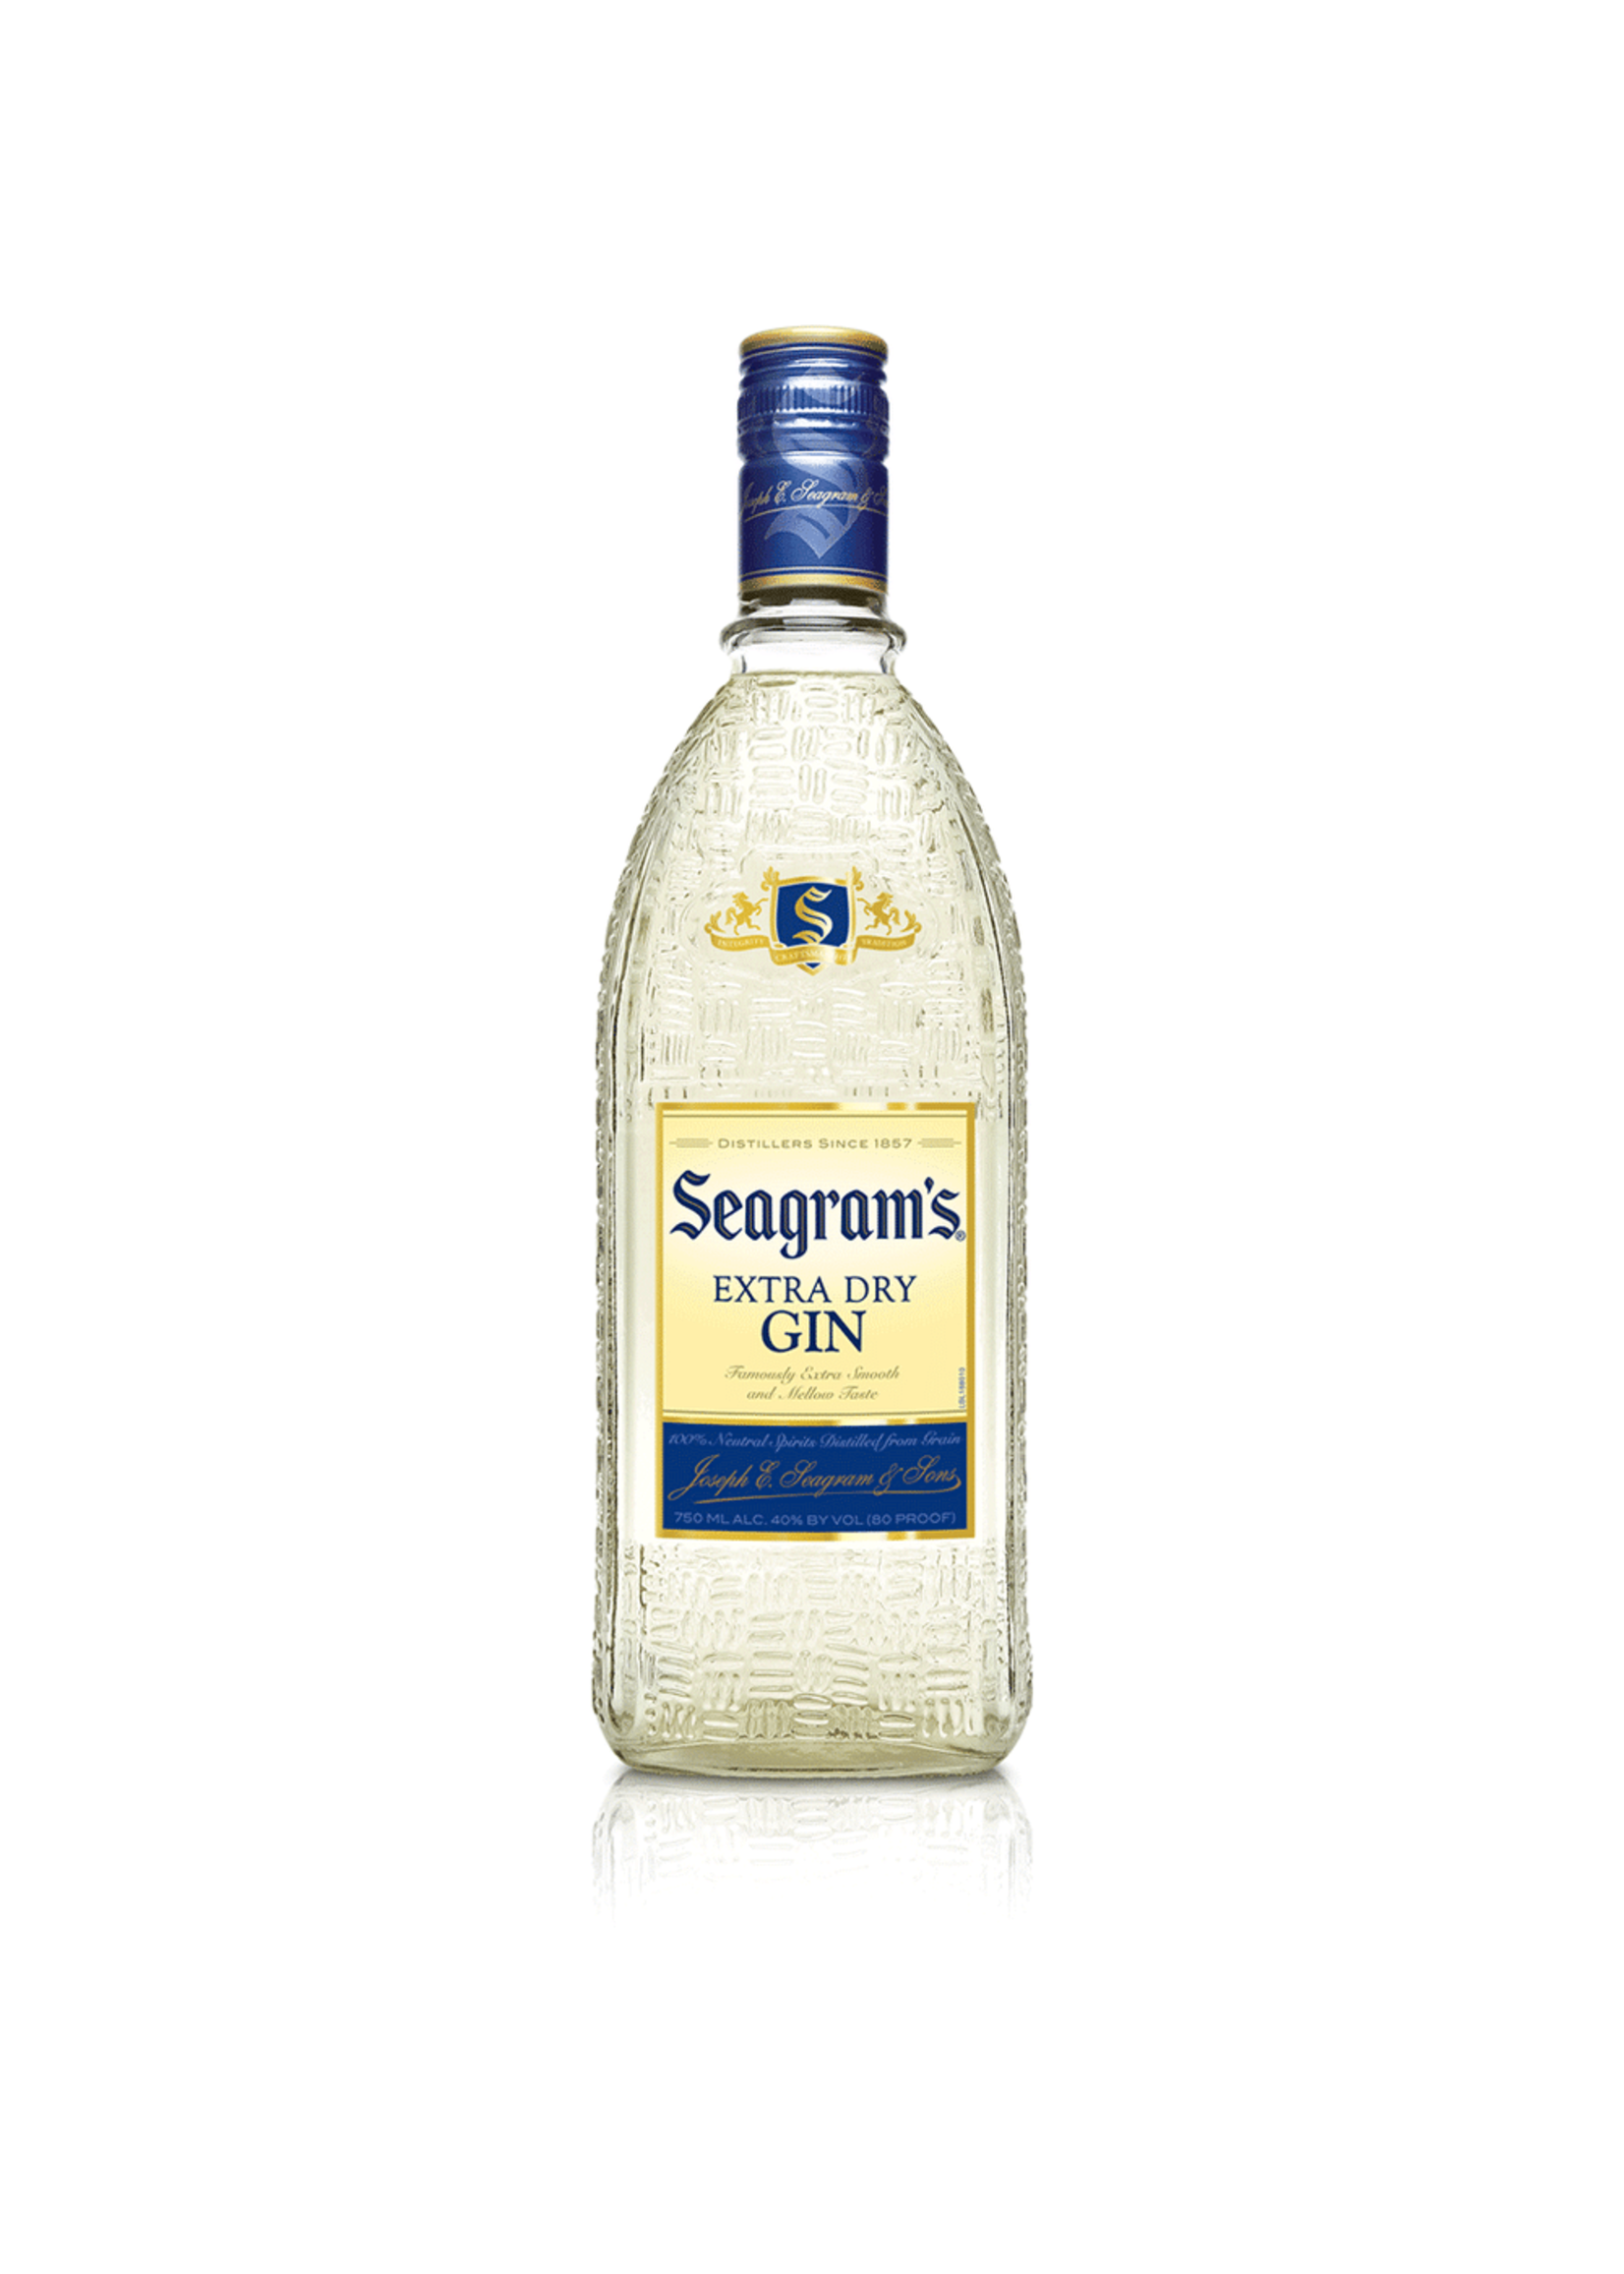 Seagrams Extra Dry Gin 80Proof 750ml